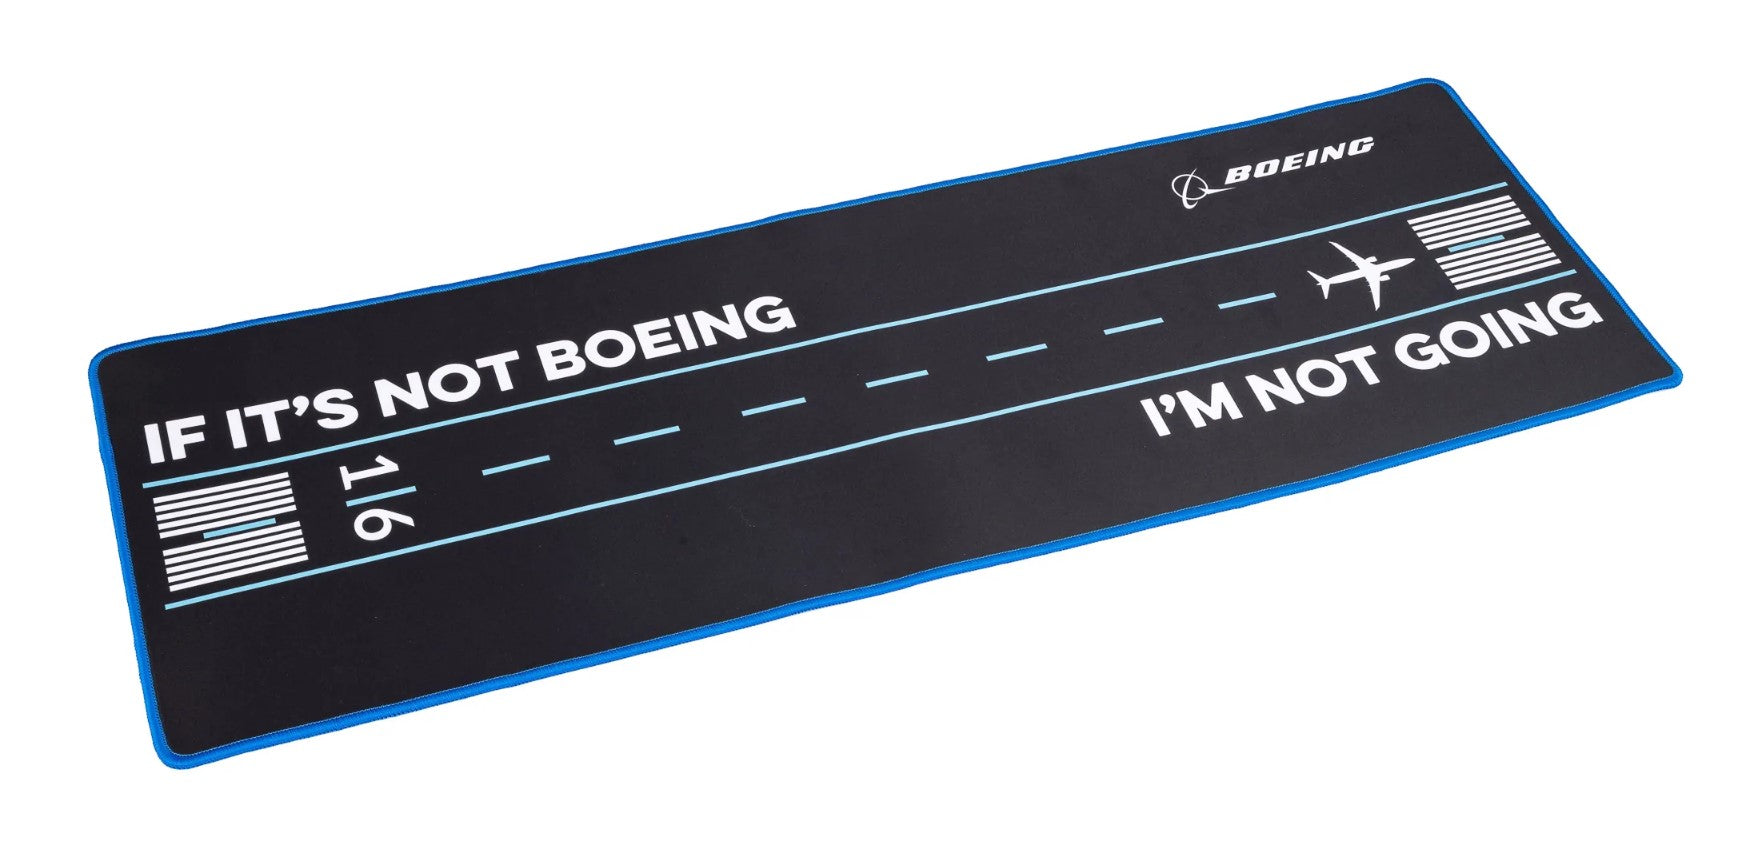 Boeing "If It's Not Boeing, I'm Not Going" Desk Pad